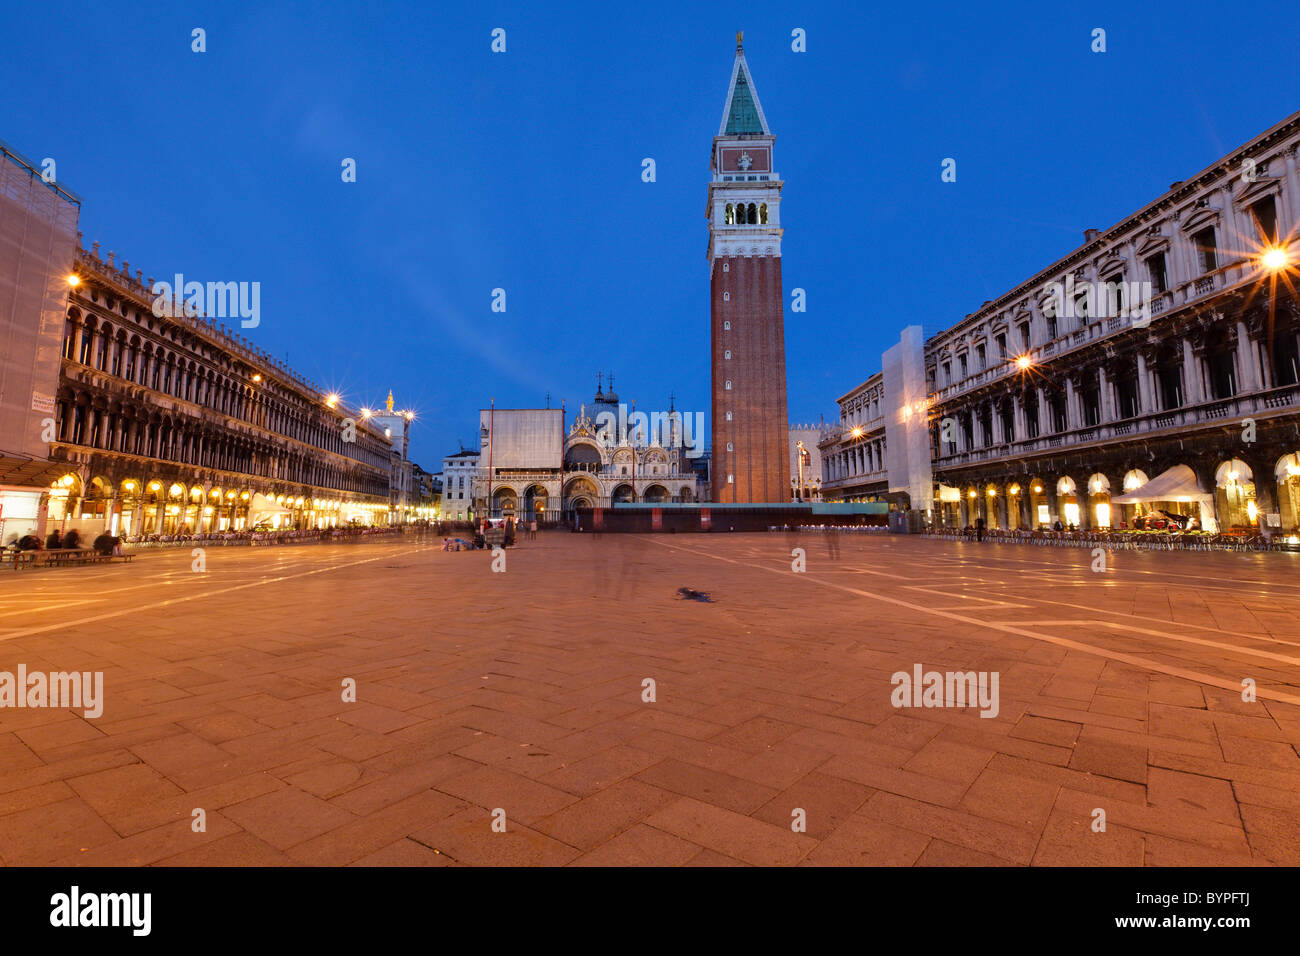 St Mark's Square at Night with the Cafes and the Clock tower, Venice, Veneto, Italy, Europe Stock Photo